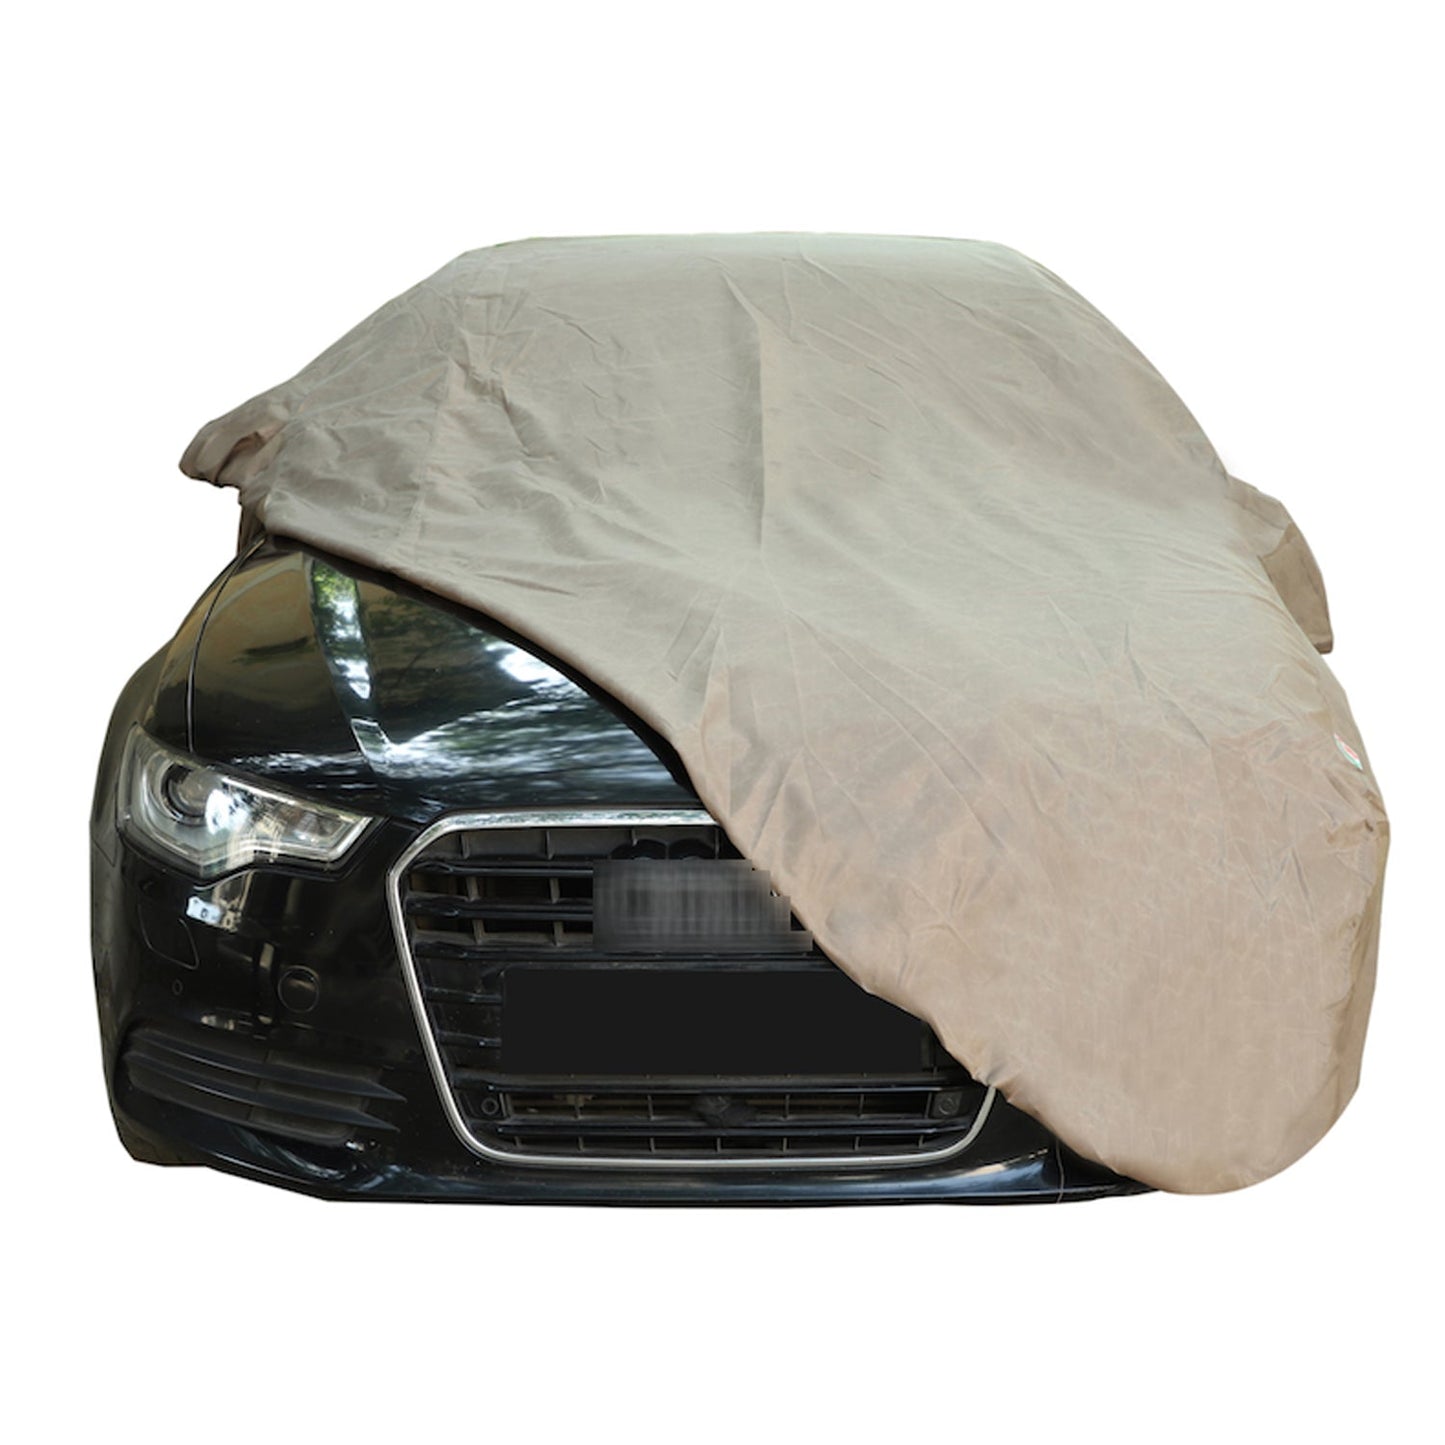 Oshotto Brown 100% Waterproof Car Body Cover with Mirror Pockets For MG Hector